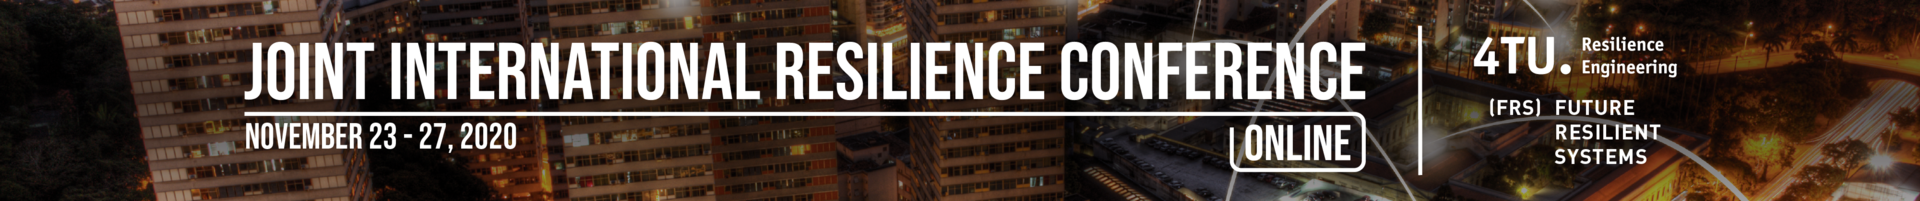 Joint International Resilience Conference 2020